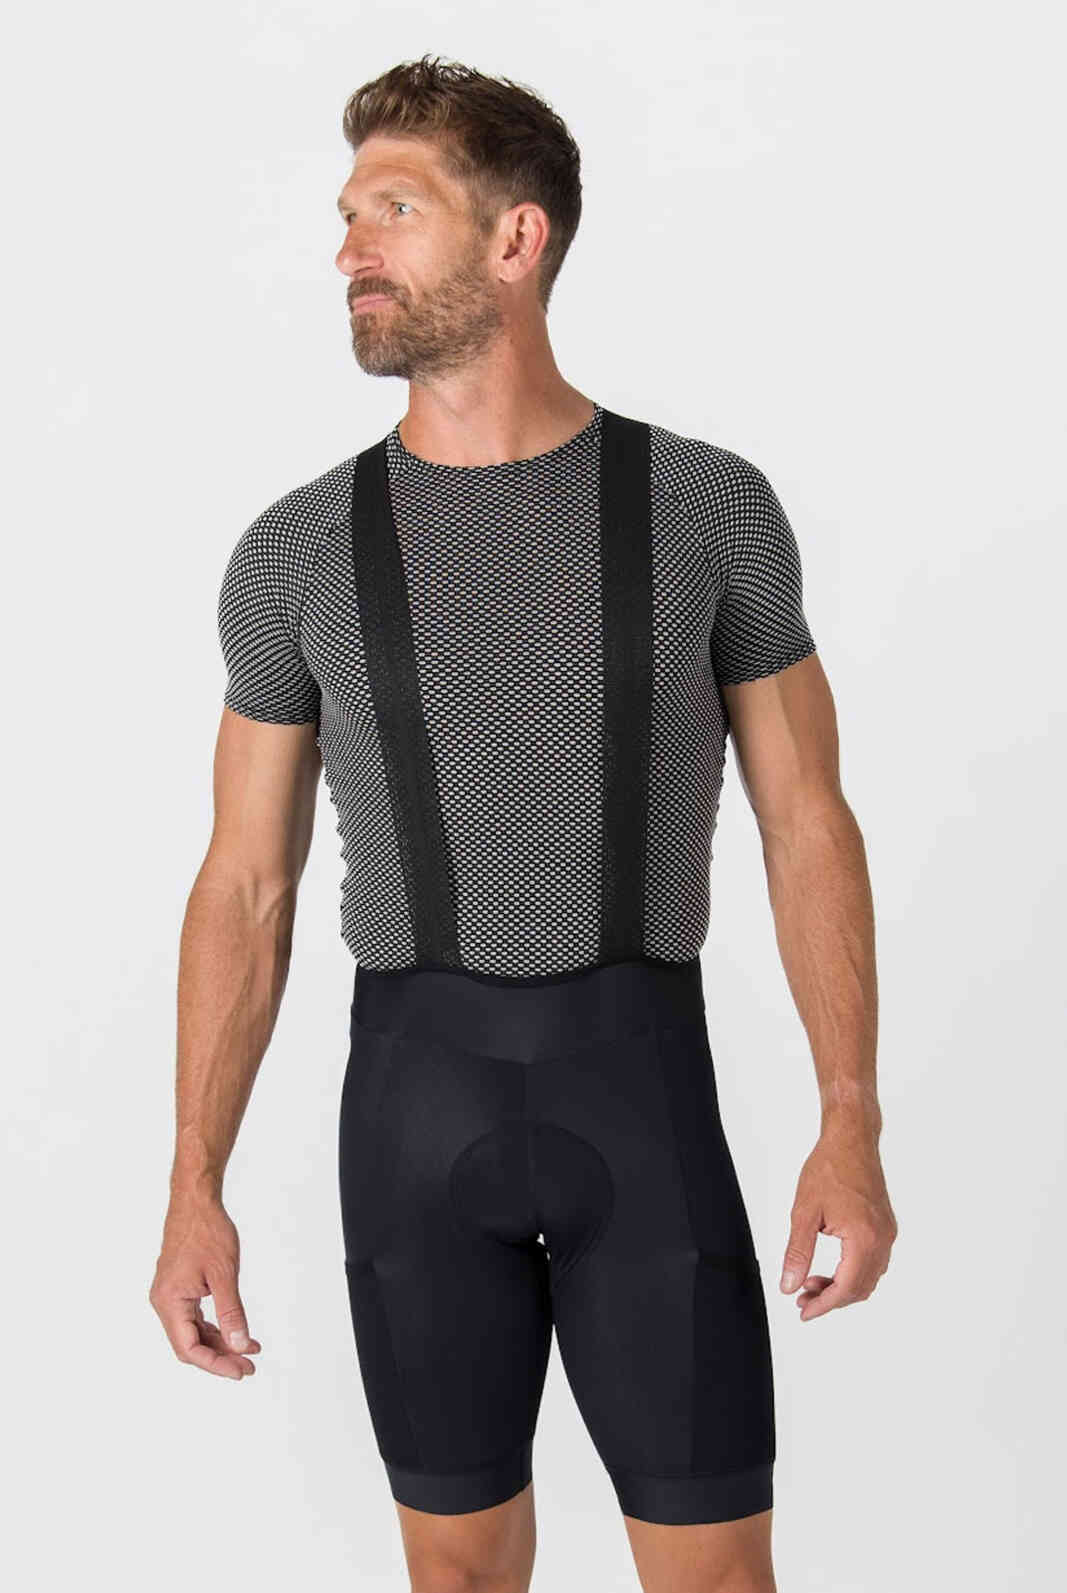 Men's Thermal Cycling Bibs, Cool & Cold Weather